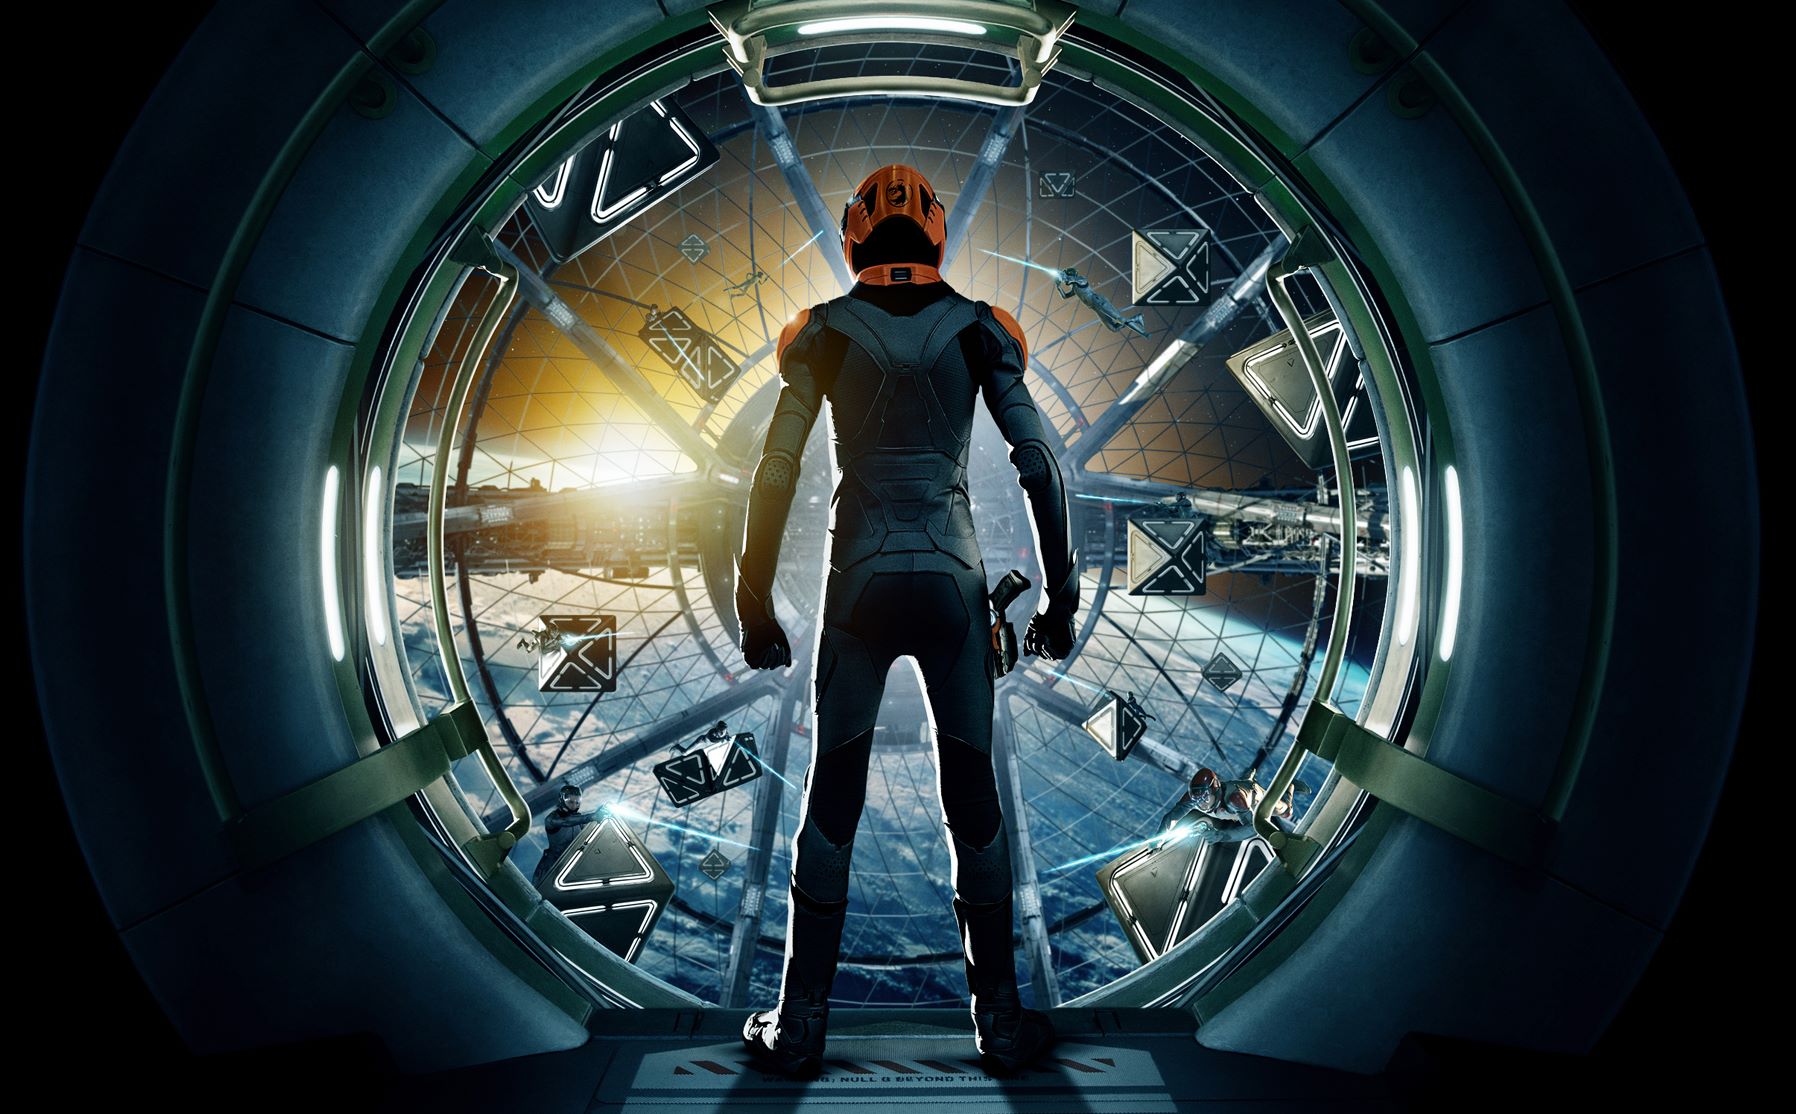 Movie Trailer: Humankind needs saving in Ender’s Game